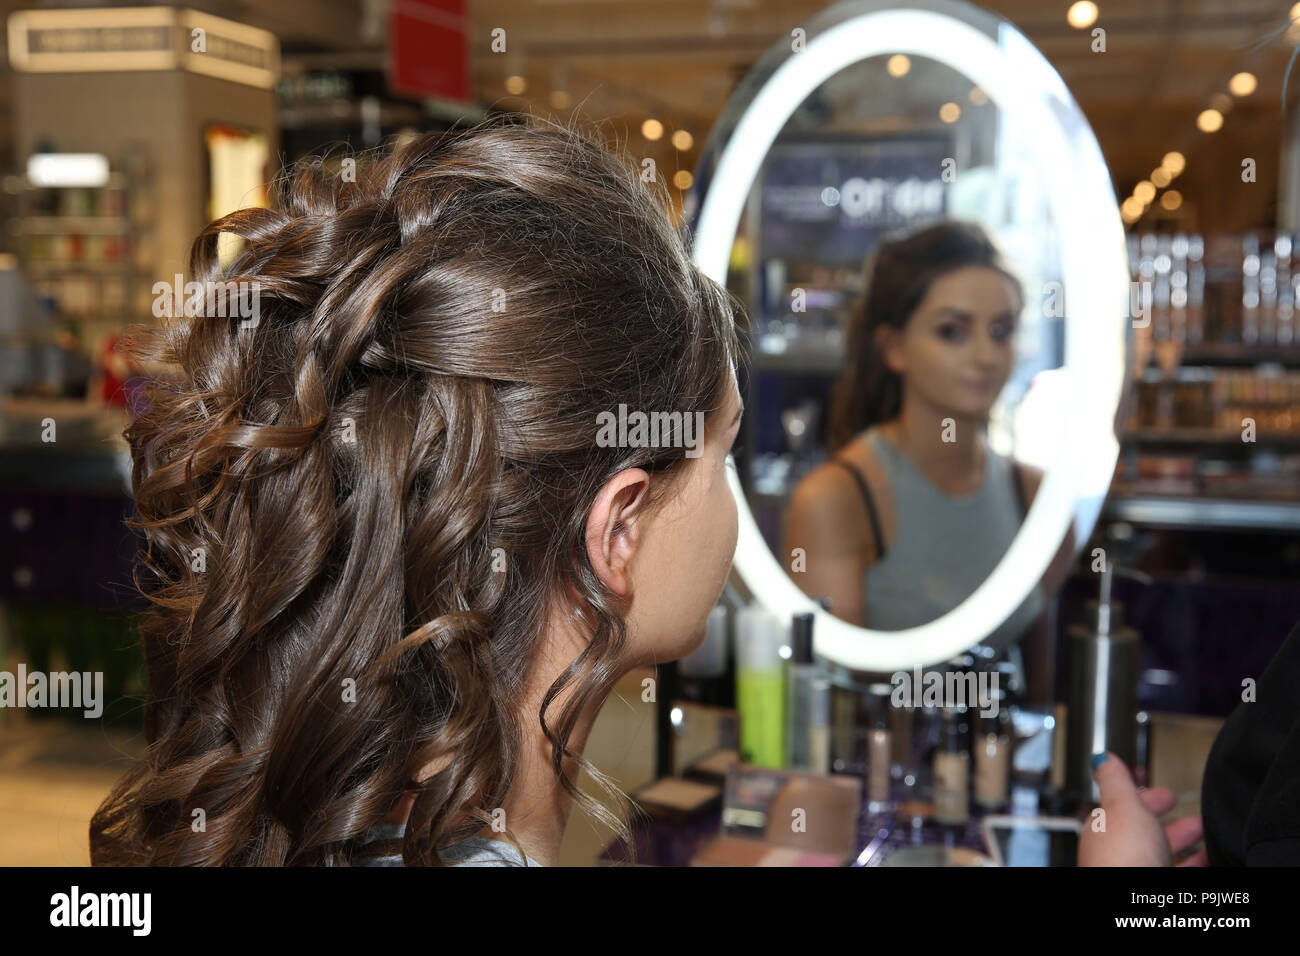 Teenage Girl Having Make Up Applied For Prom Stock Photo